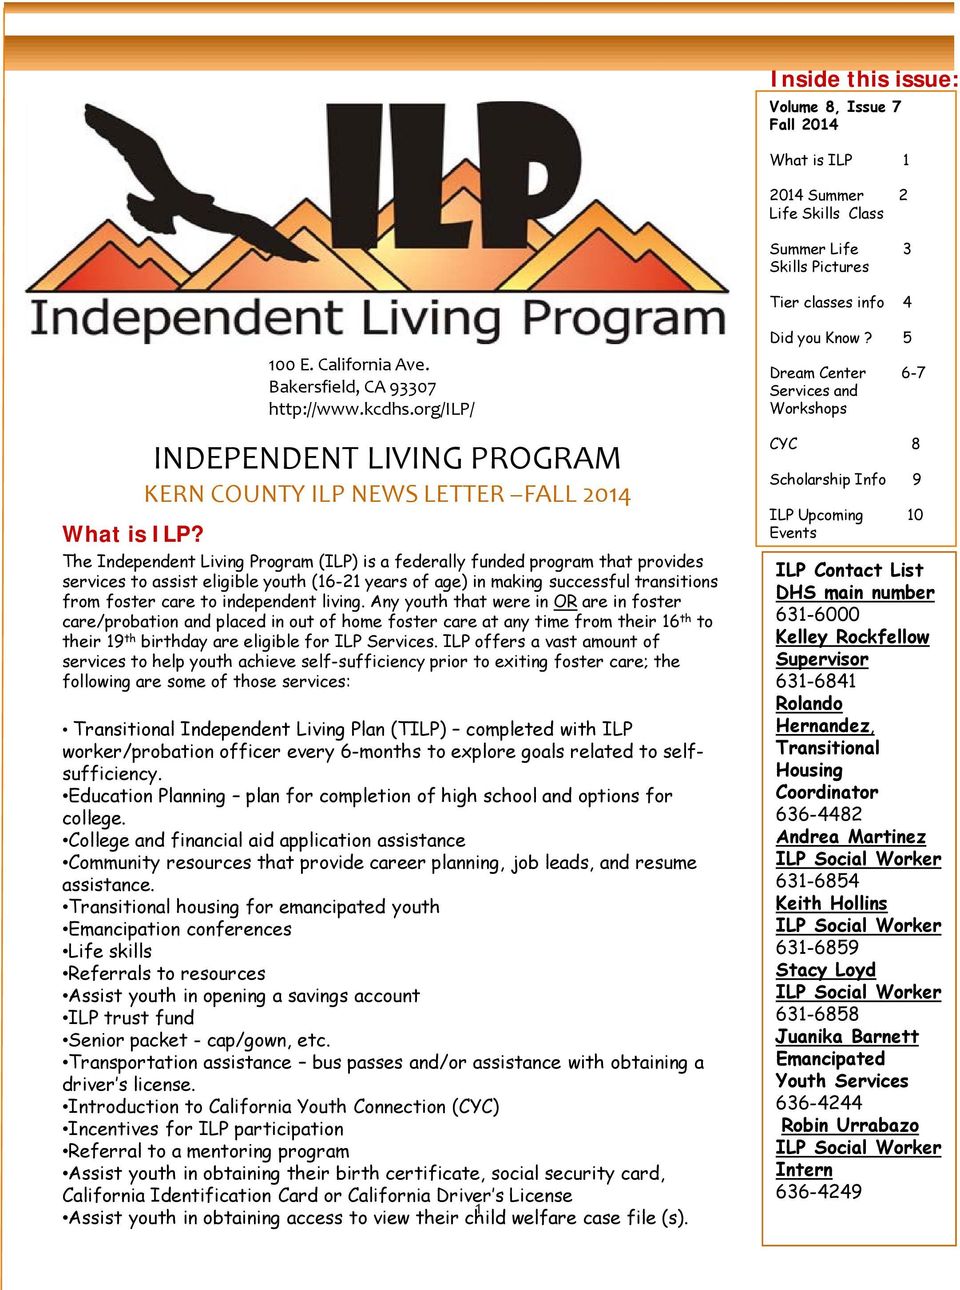 org/ilp/ INDEPENDENT LIVING PROGRAM KERN COUNTY ILP NEWS LETTER FALL 2014 The Independent Living Program (ILP) is a federally funded program that provides services to assist eligible youth (16-21